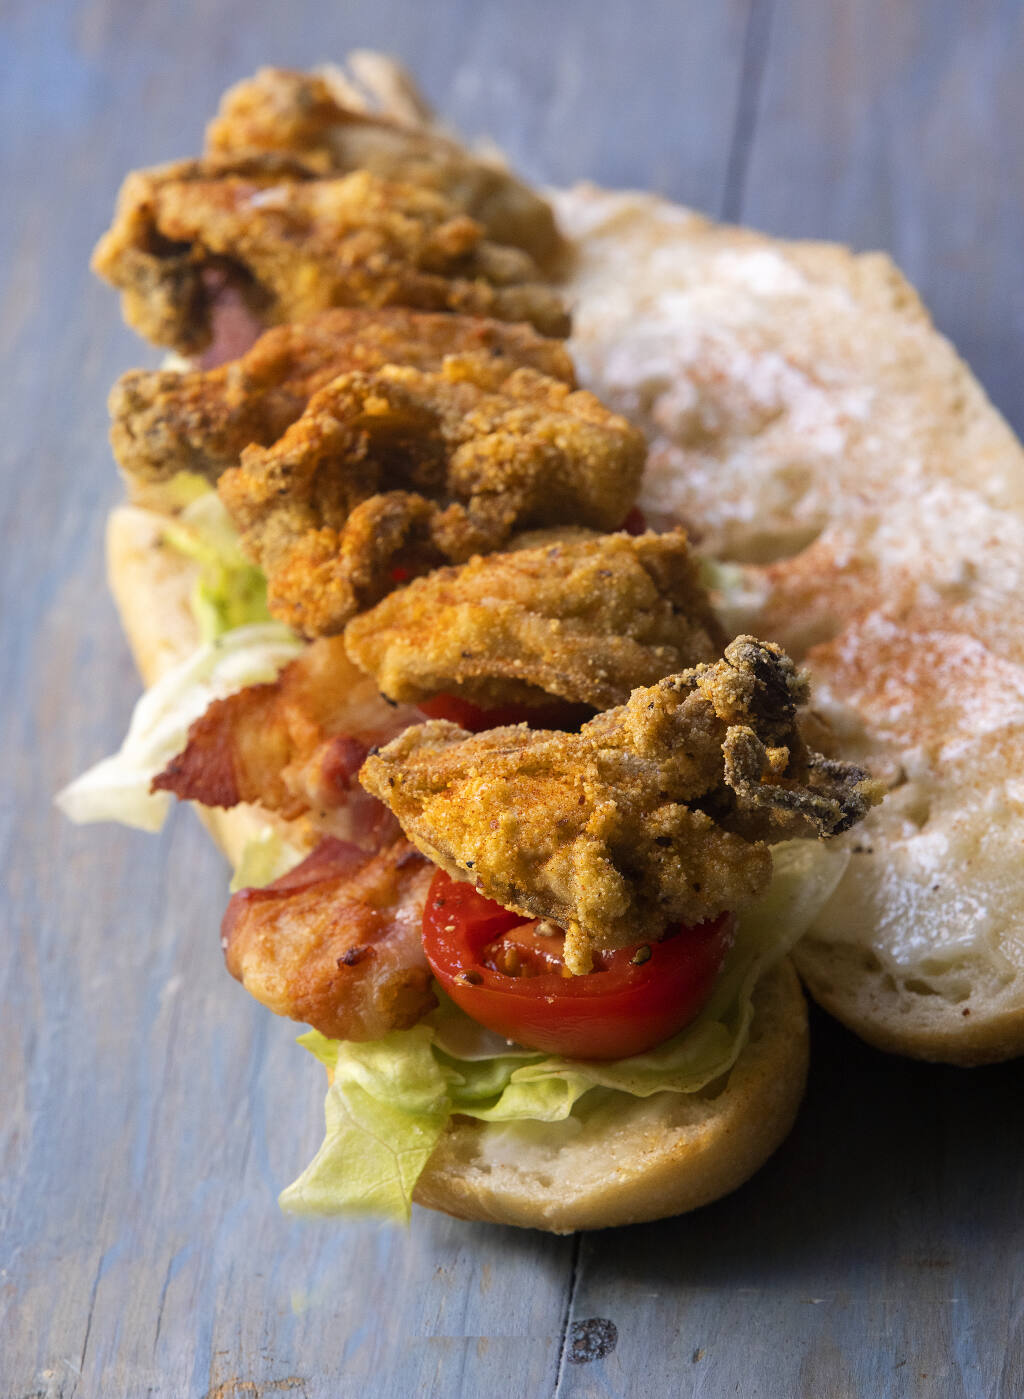 Fried Oyster Po' Boy from chef John Ash is “dressed” with bacon, lettuce and tomatoes.  (John Burgess/The Press Democrat)